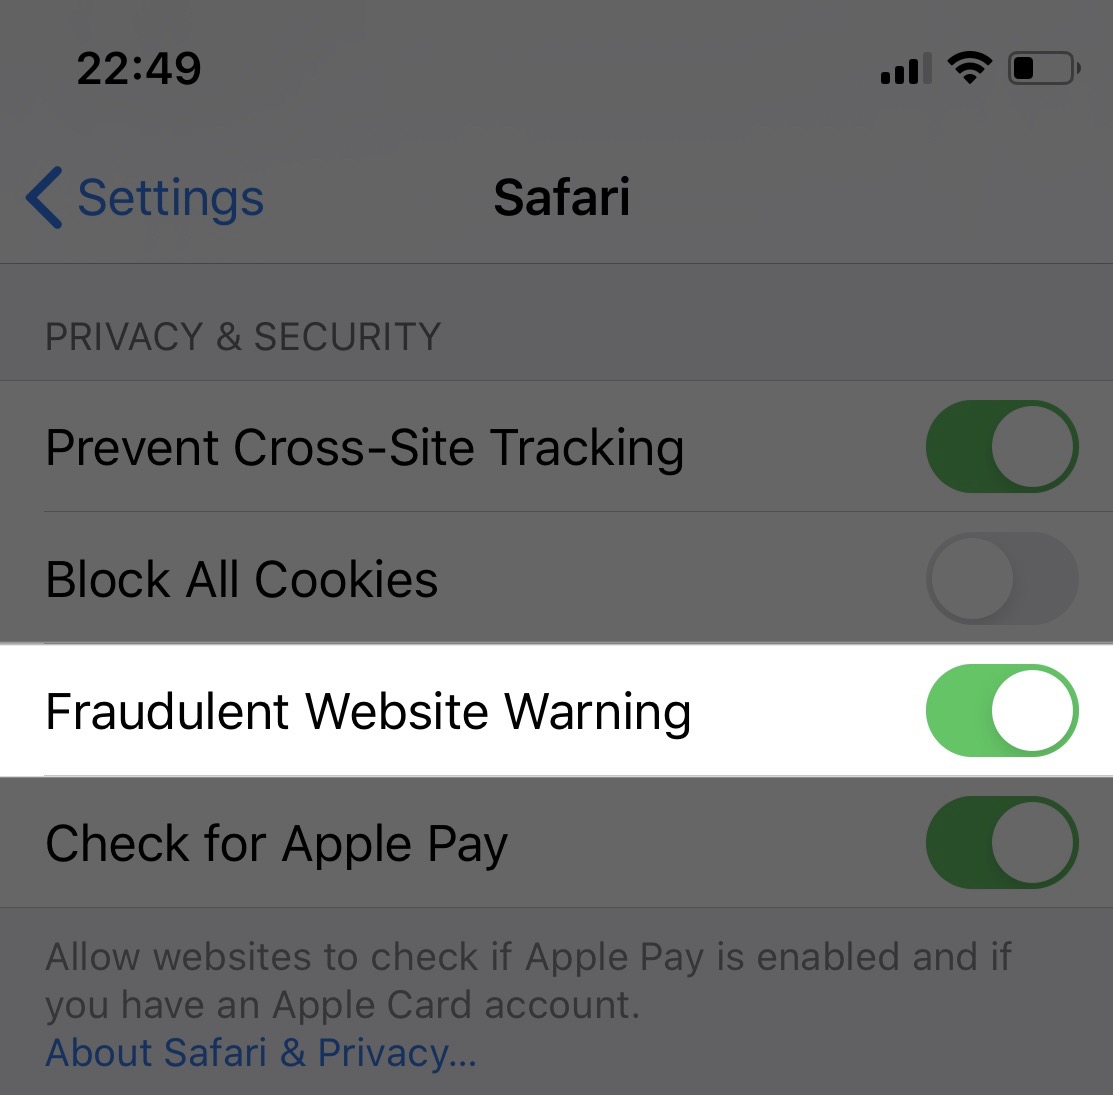 Apple’s “Fraudulent Website Warning” toggle which is enabled by default.